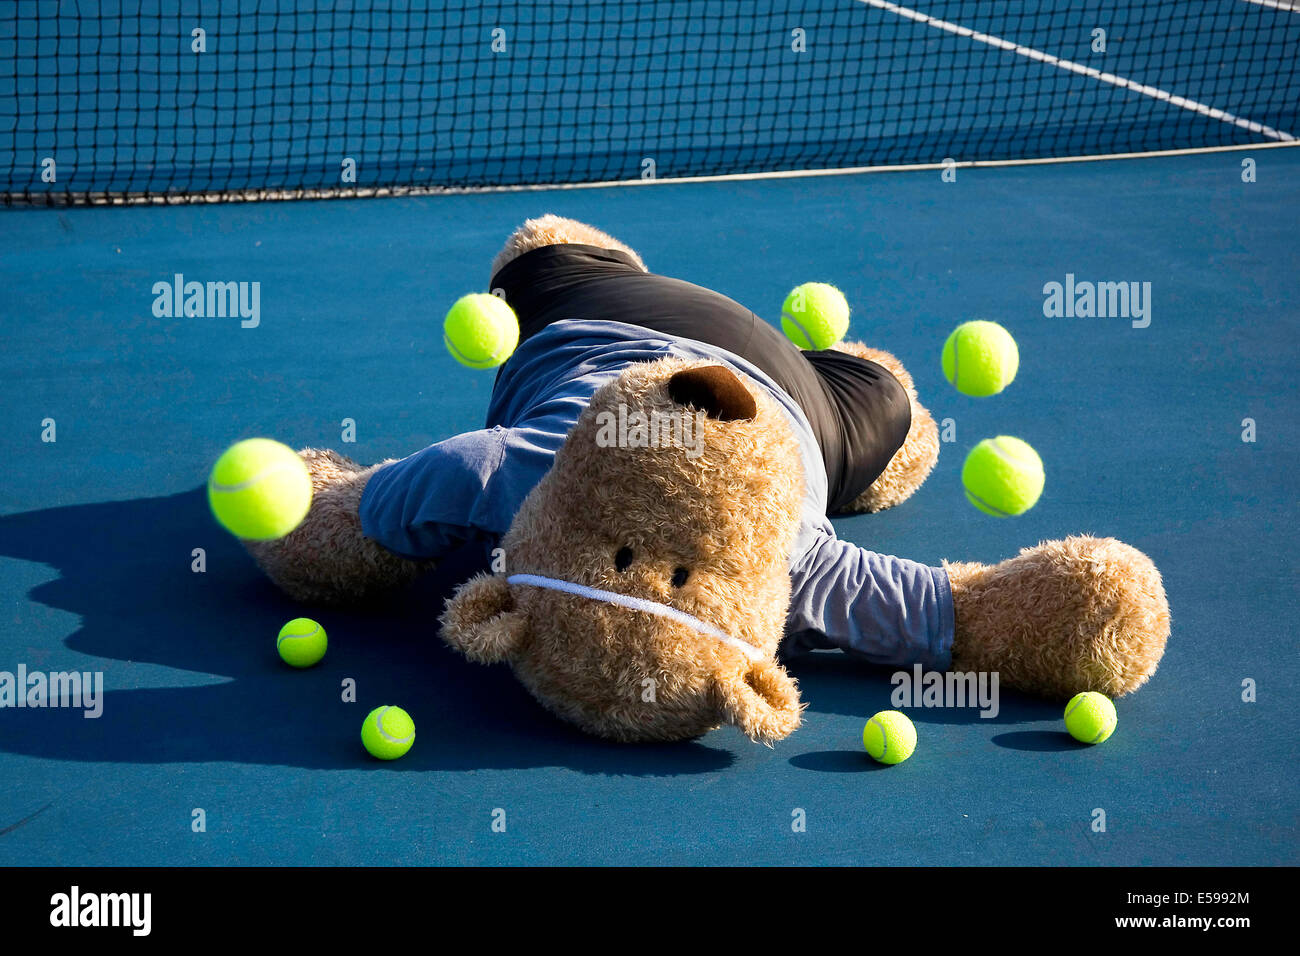 Adelaide Debtor Objected Oversized teddy bear dressed as a tennis player laying on tennis court with  bouncing balls Stock Photo - Alamy